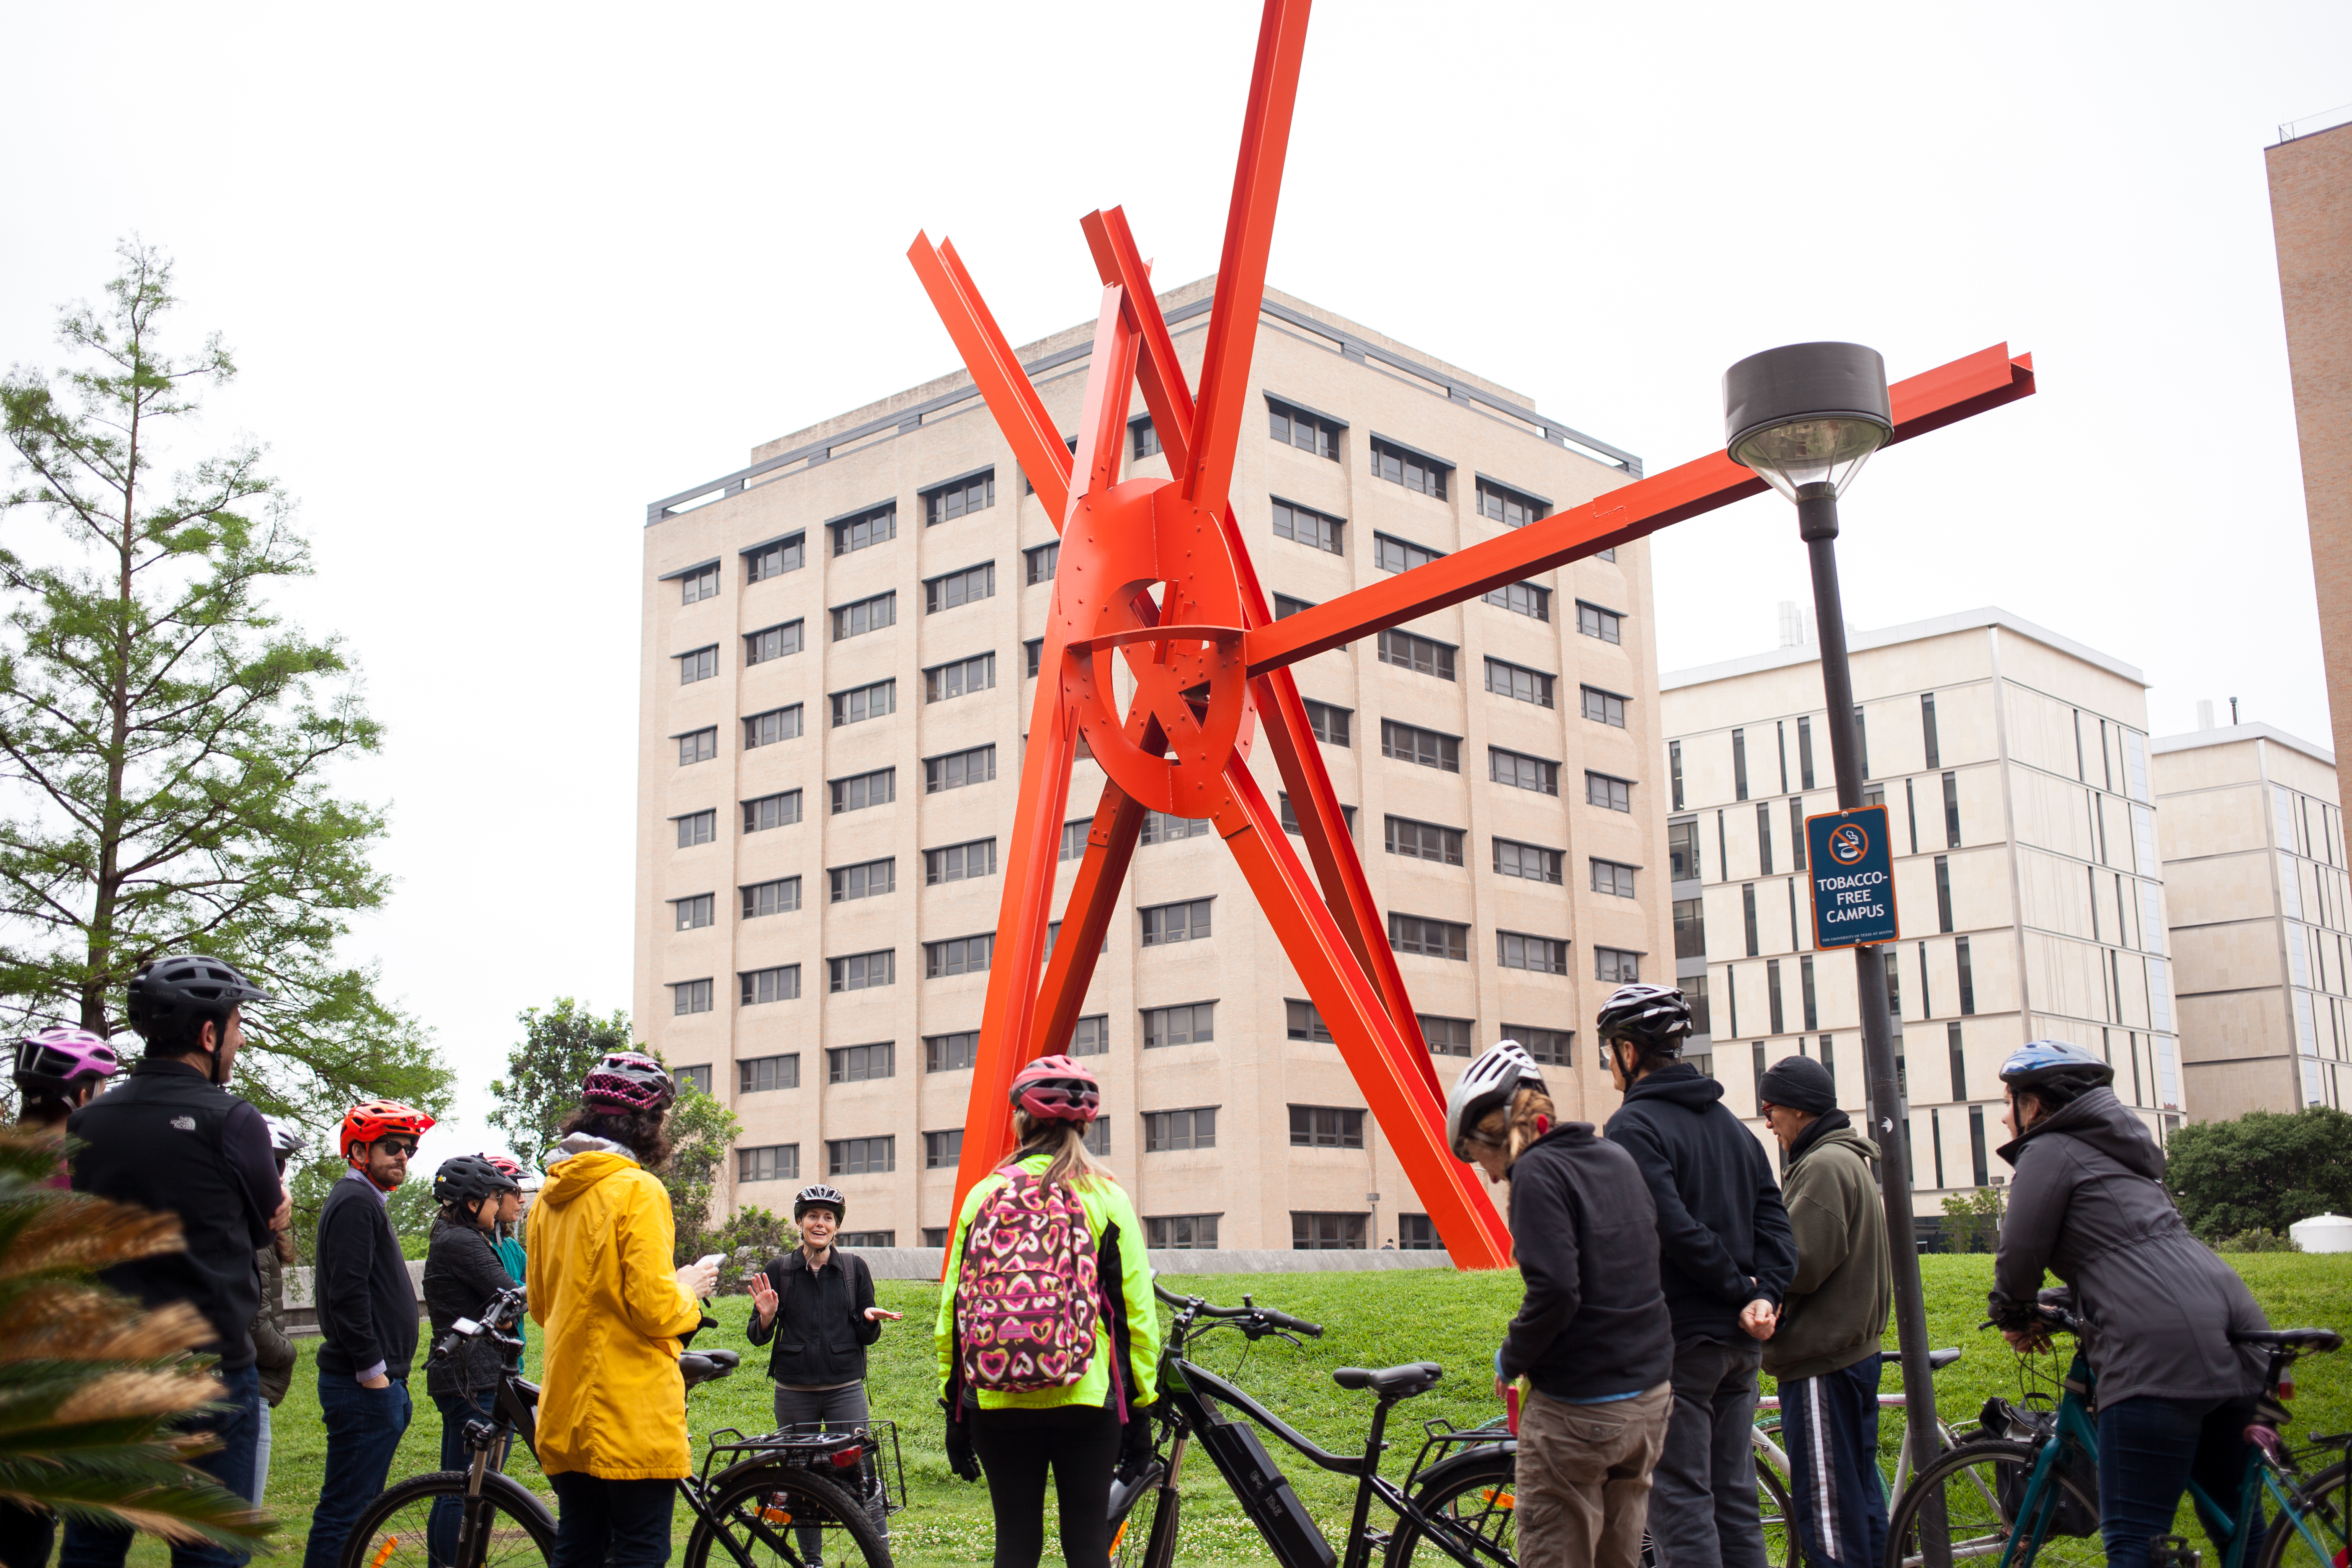 A group of people with bikes wear helmets and stand looking at Marc di Suvero's "Clock Knot," a large red sculpture that juts out over the green hill it's placed on 